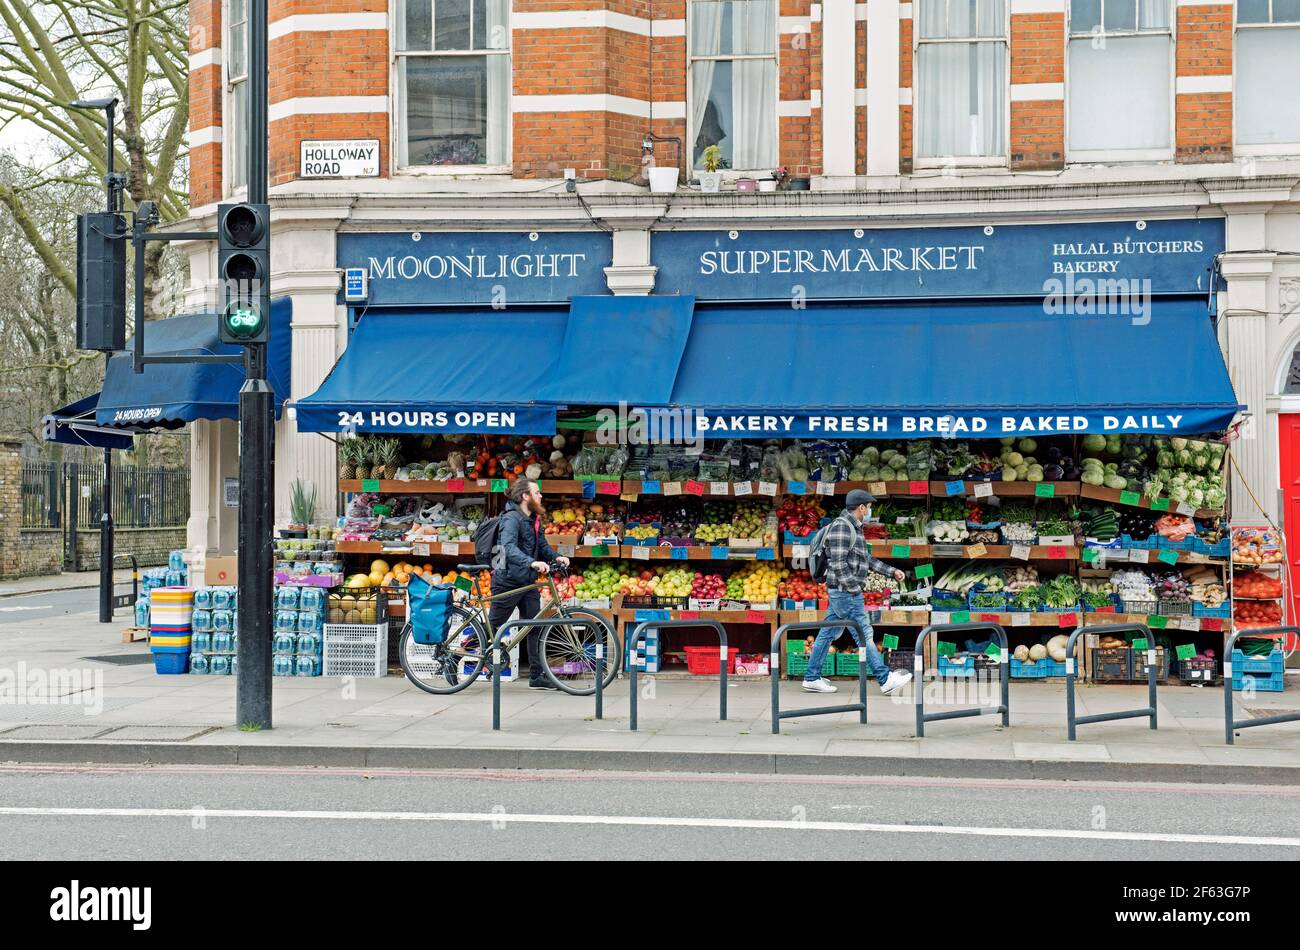 Moonlight Supermarket with fruit and vegetables on show people including cyclist passing, Holloway Road, London Borough of Islington. Stock Photo